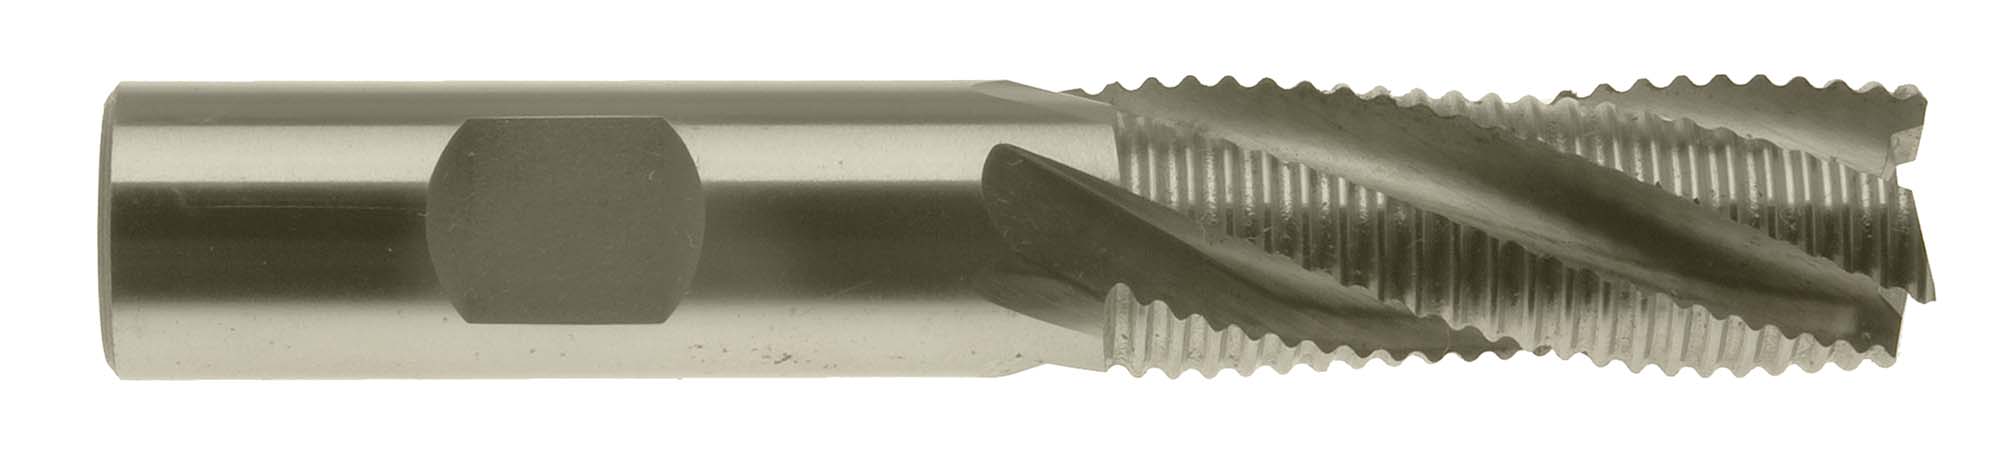 EM-CR362 - 1-1/4" Coarse Tooth M42 Cobalt Roughing End Mill-1-1/4" Shank